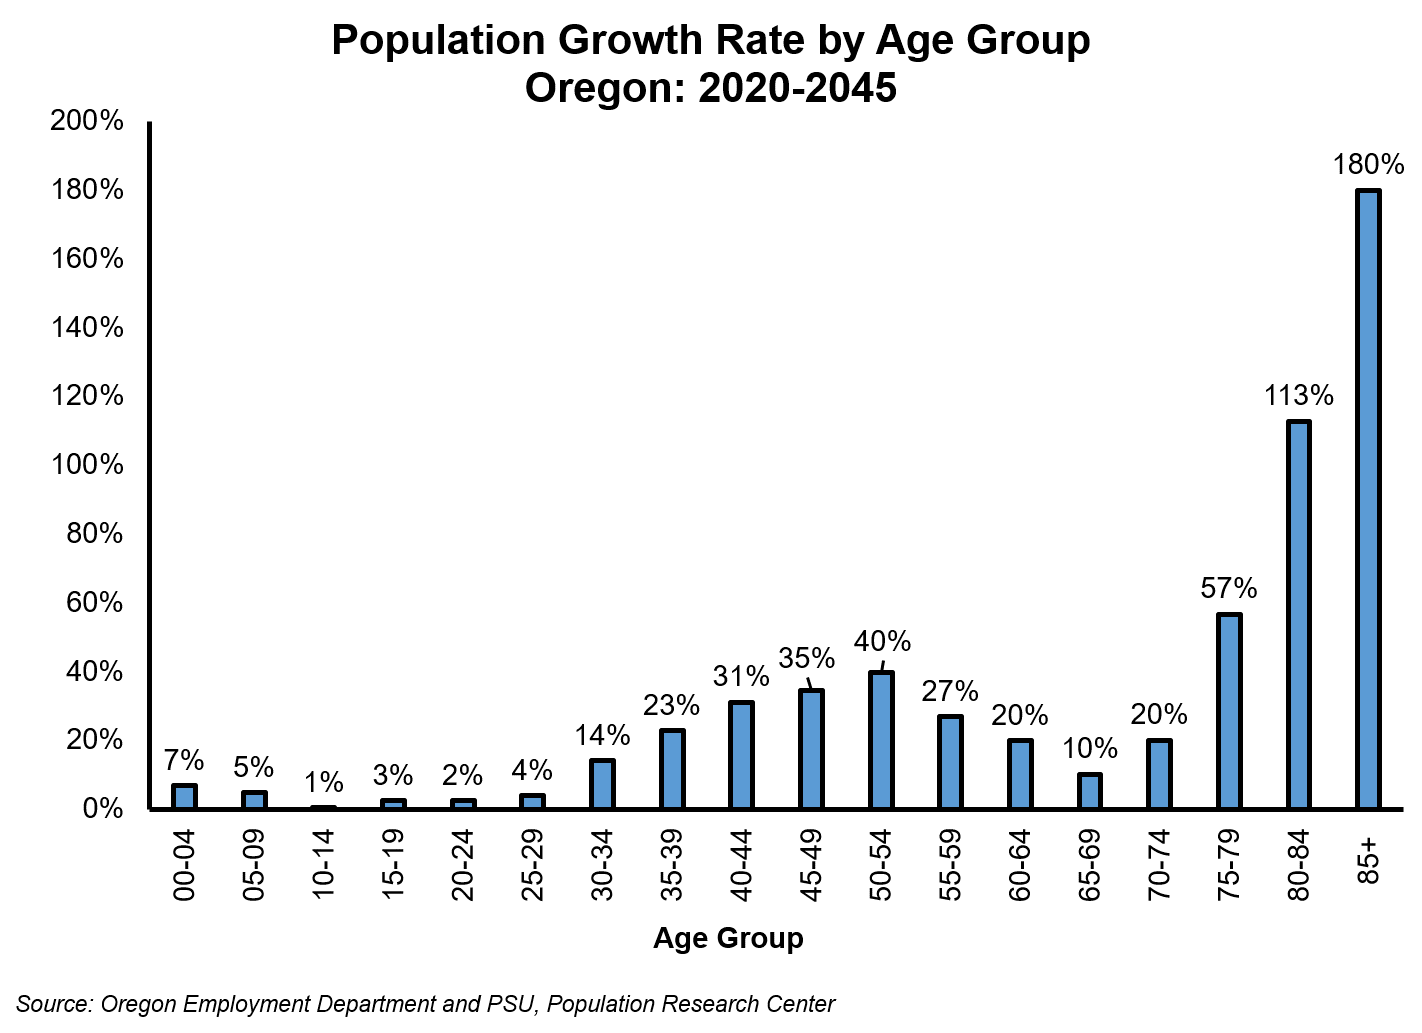 Graph showing population growth rate by age group, Oregon: 2020-2045